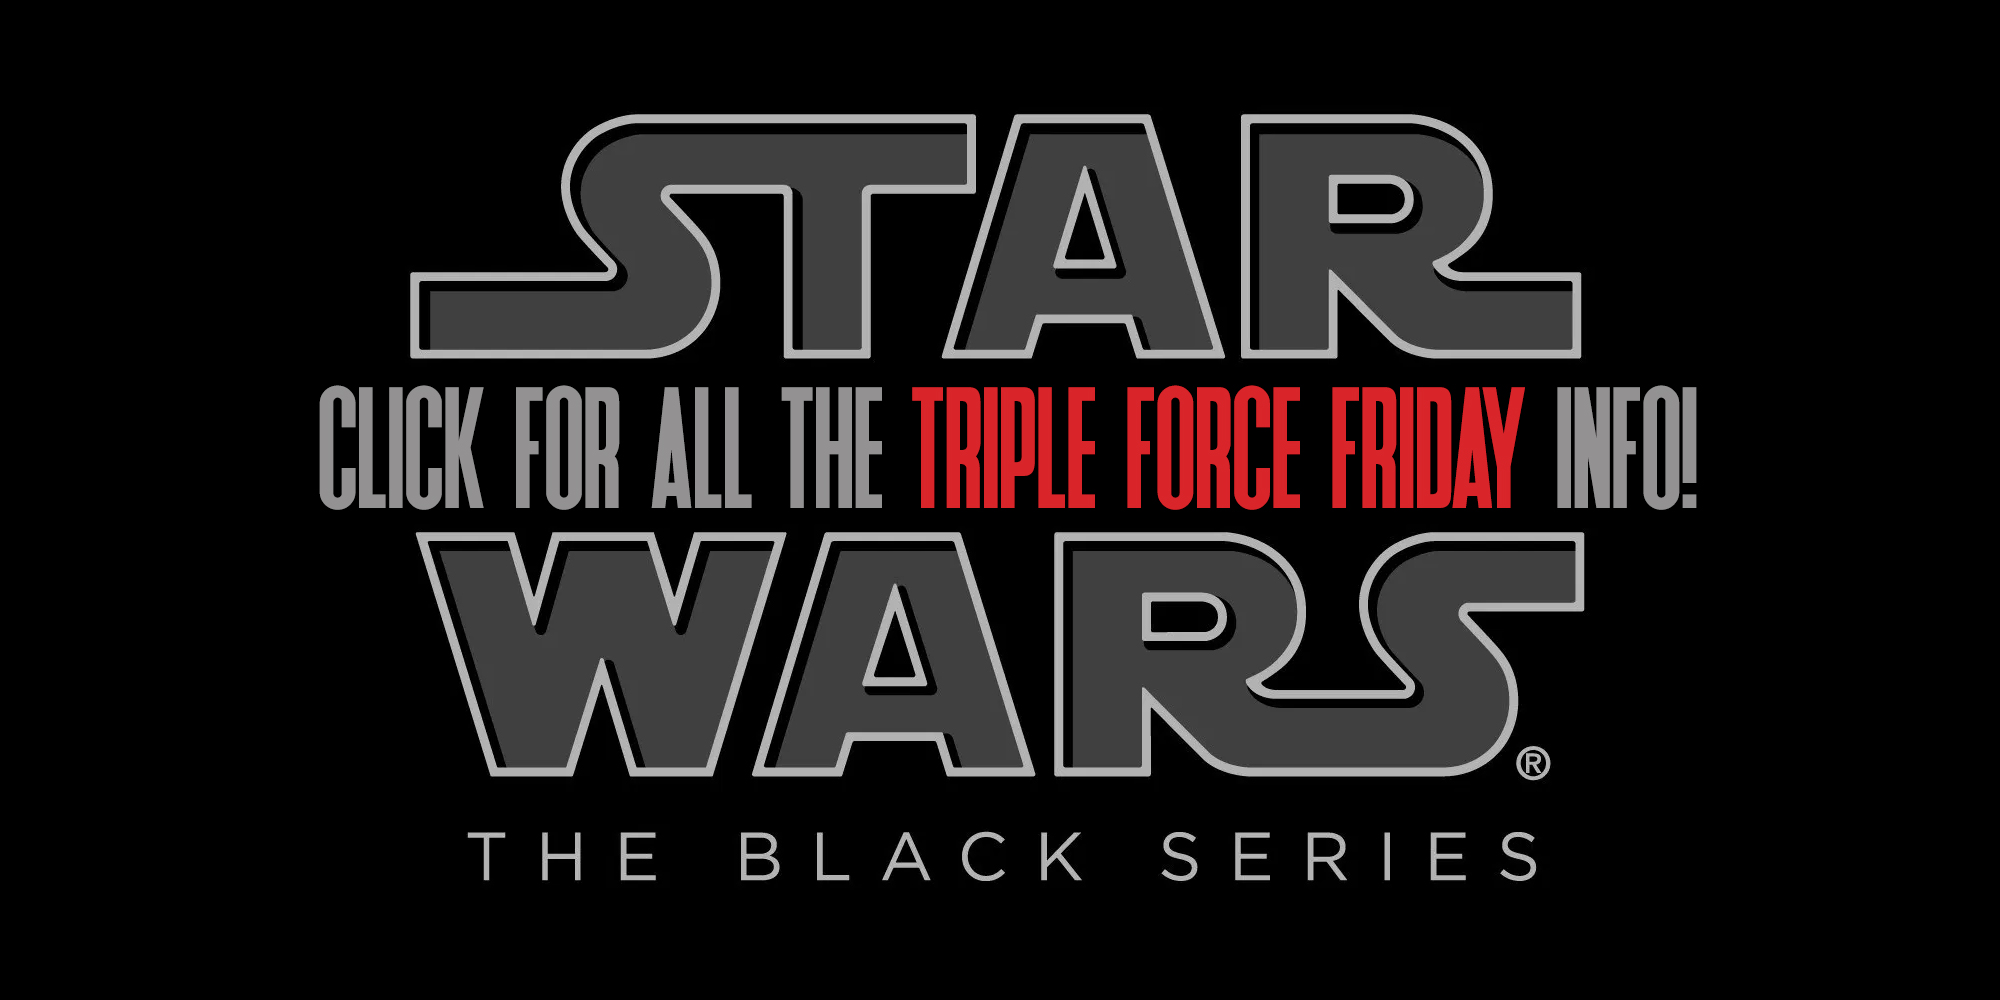 Black Series 6" Fans! Here Are The Triple Force Friday Details!